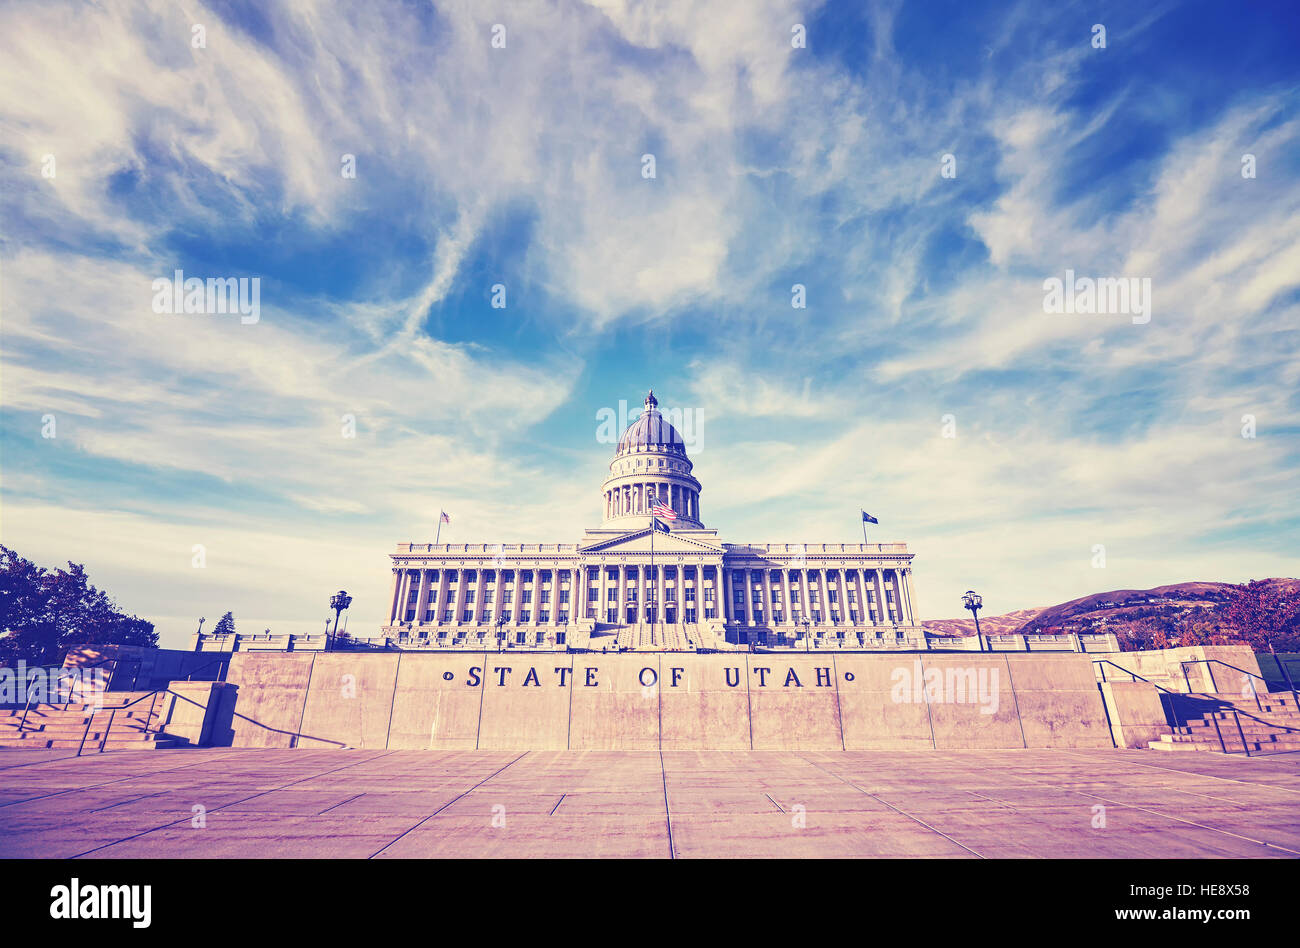 Vintage stylized photo of Utah State Capitol building in Salt Lake City, USA. Stock Photo